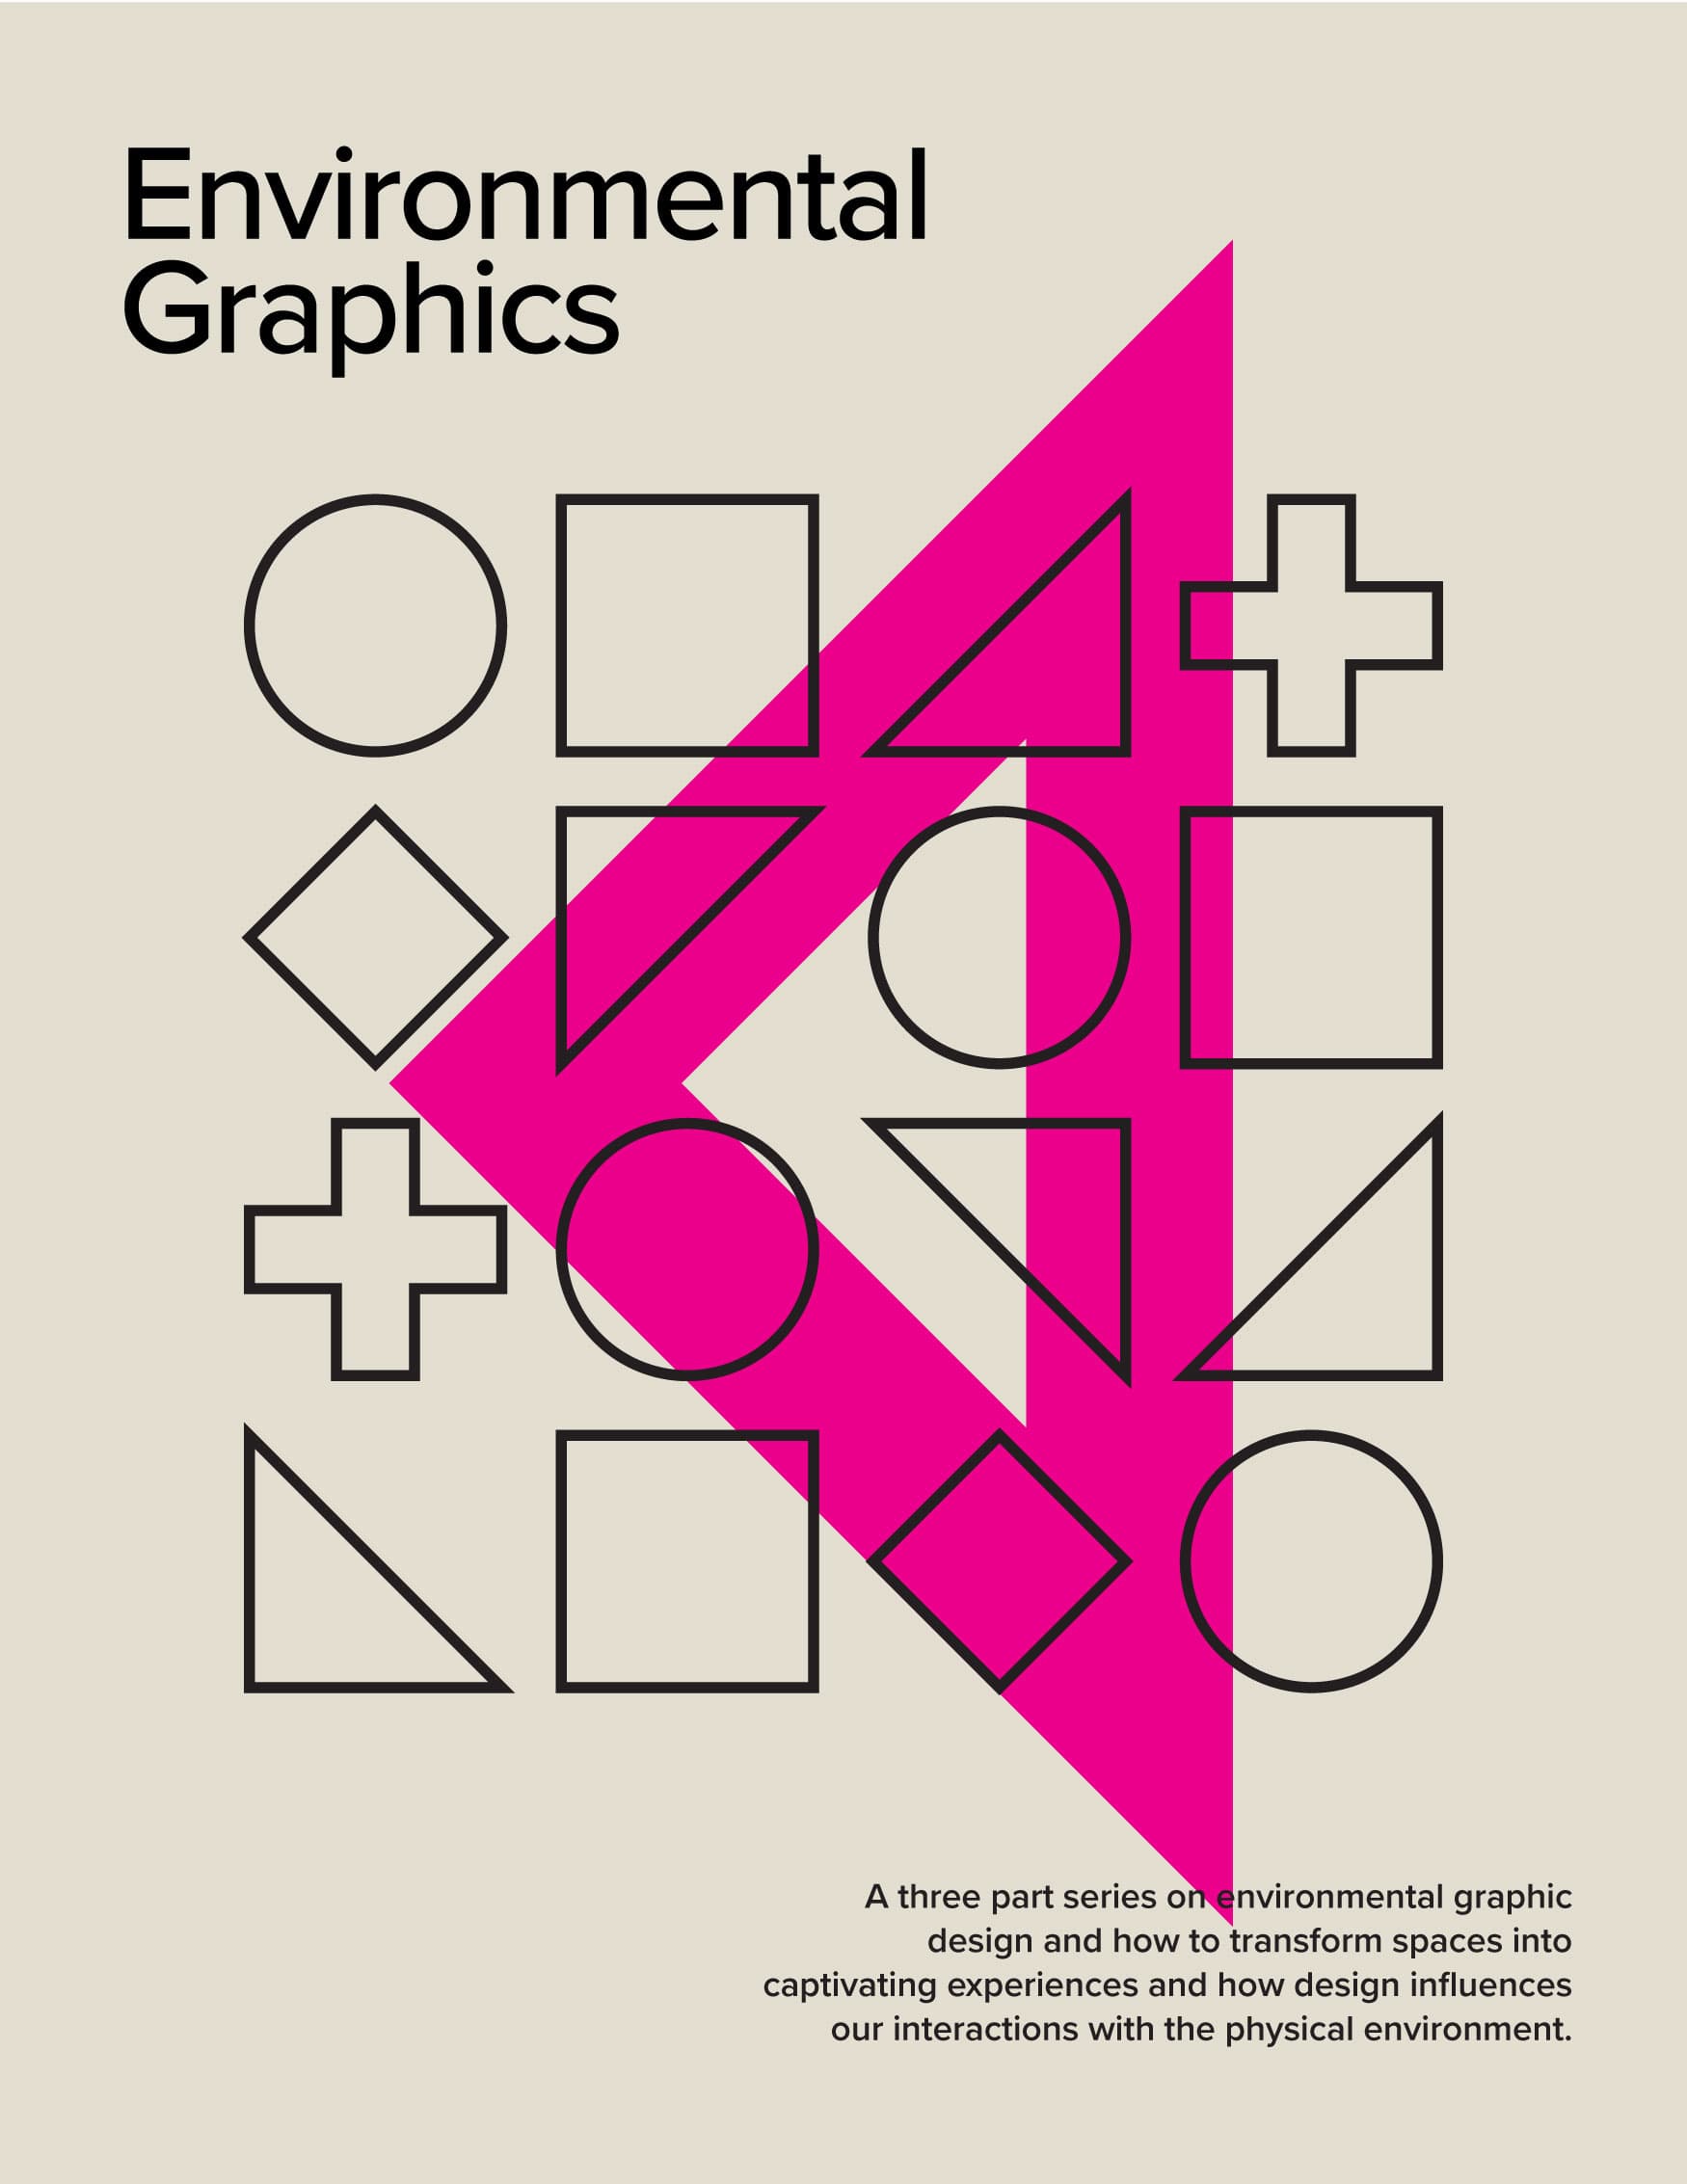 Environmental Graphic Design cover graphics for article series with linework shapes in grid format with one large magenta triangle in the background.